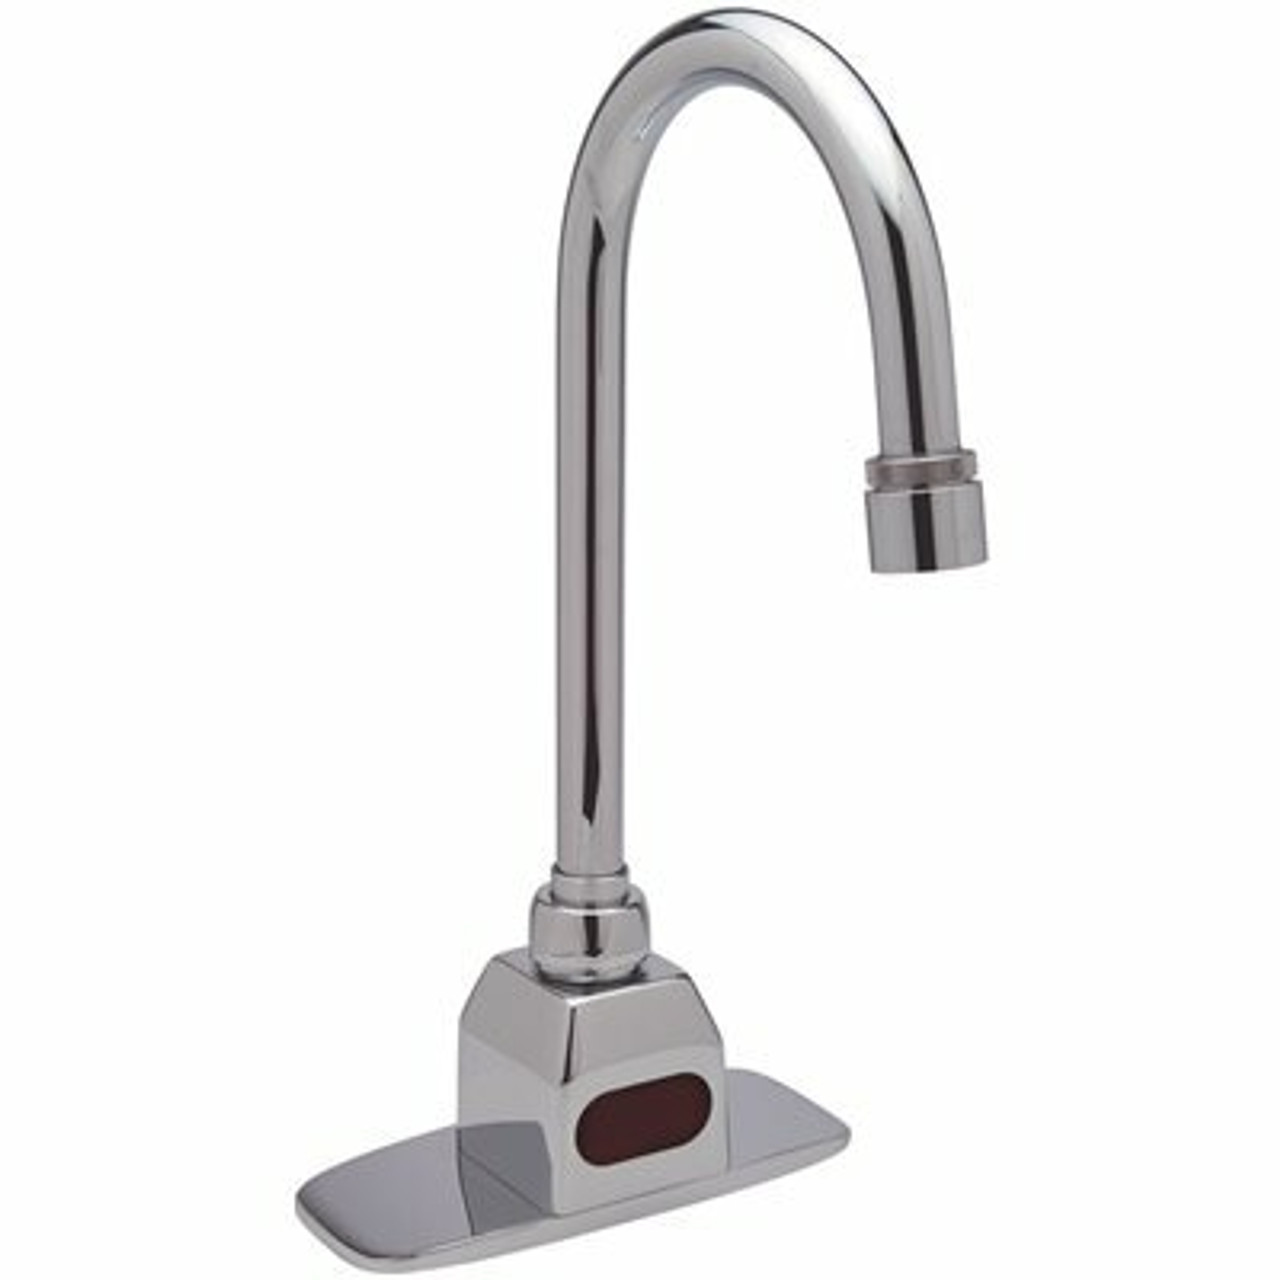 Zurn Battery Powered Single Hole Touchless Bathroom Faucet In Chrome